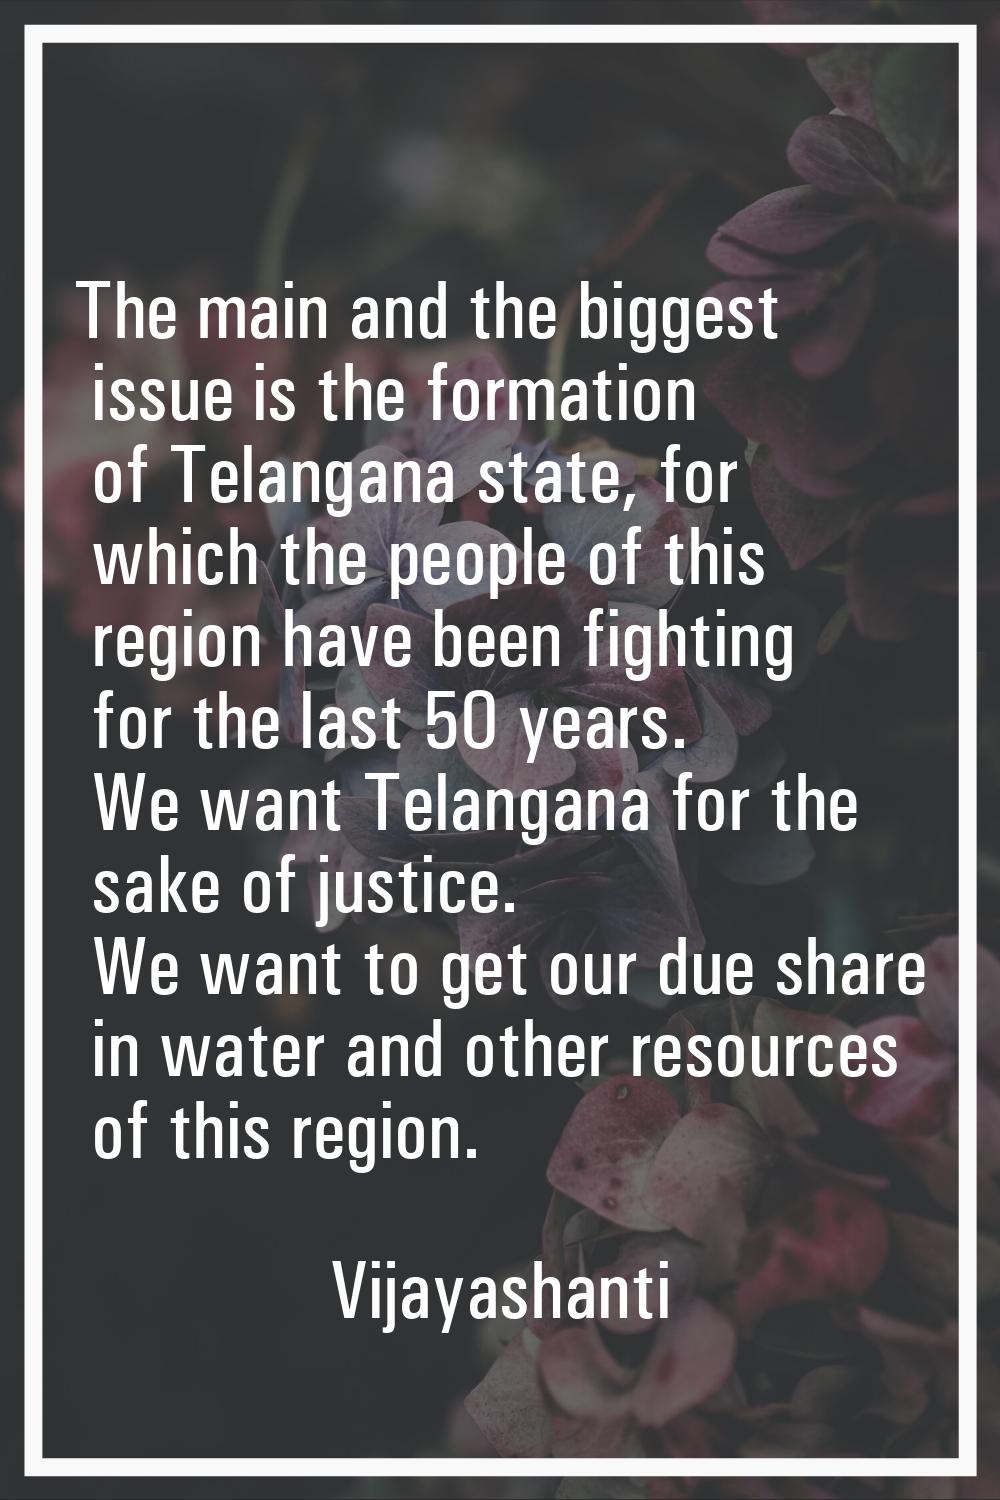 The main and the biggest issue is the formation of Telangana state, for which the people of this re